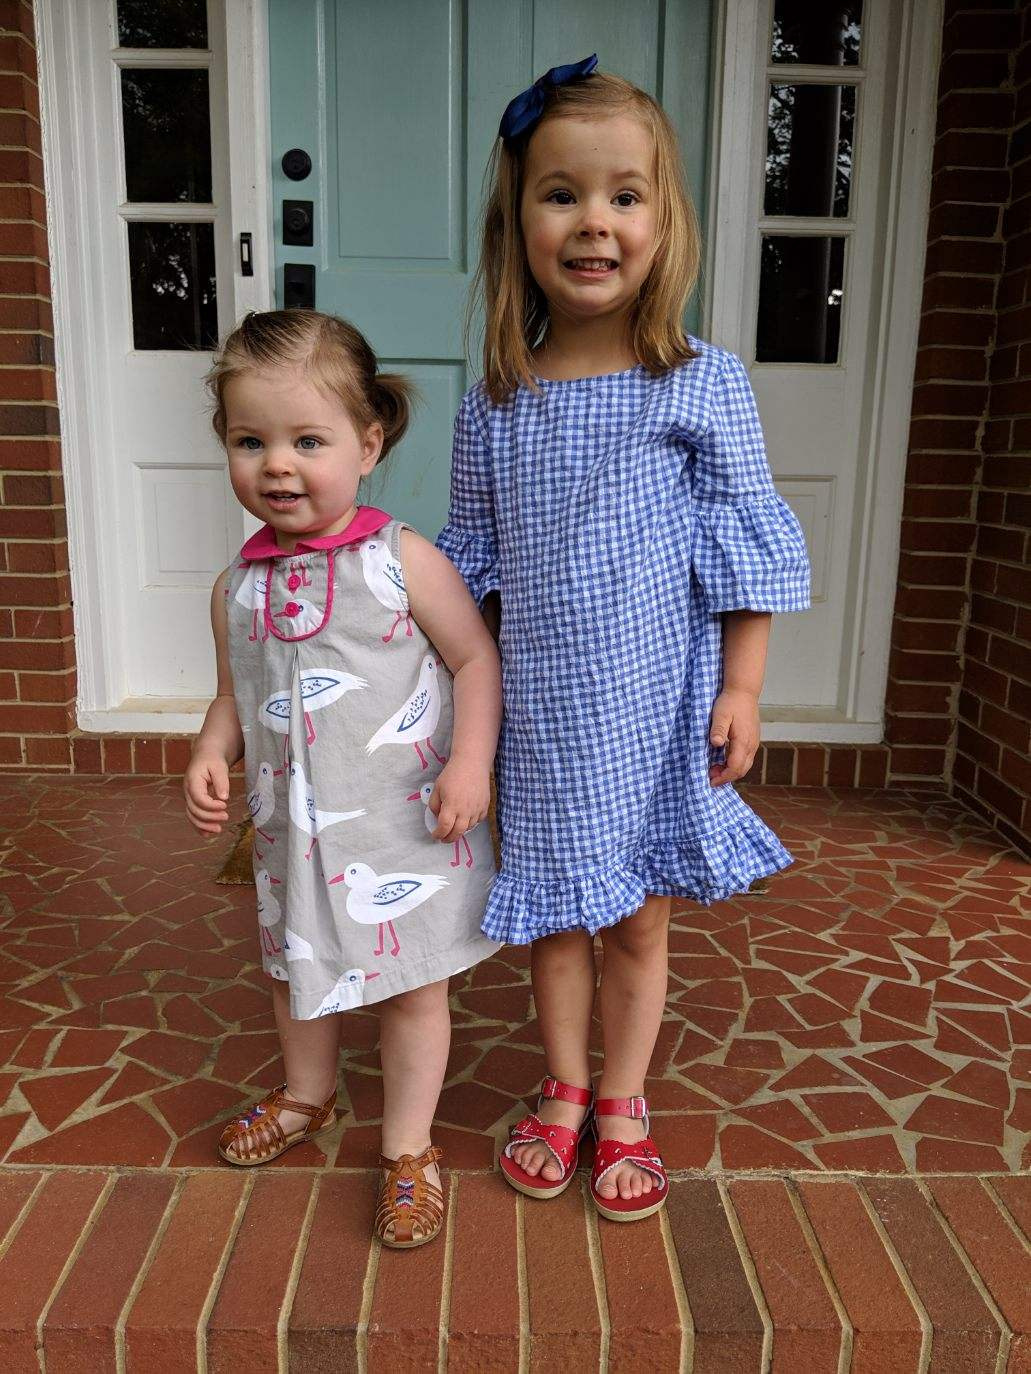 Our sweet granddaughters